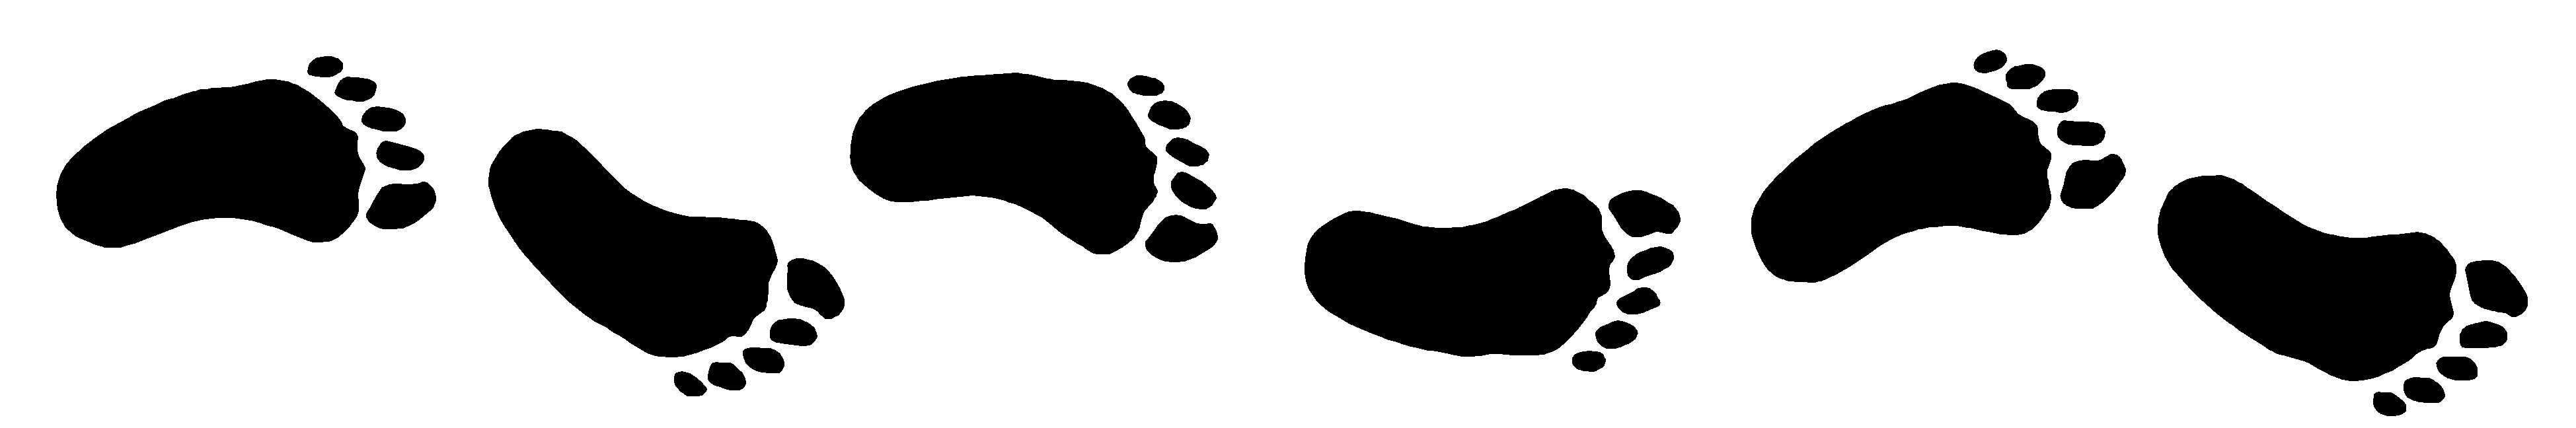 Footsteps clipart #4, Download drawings